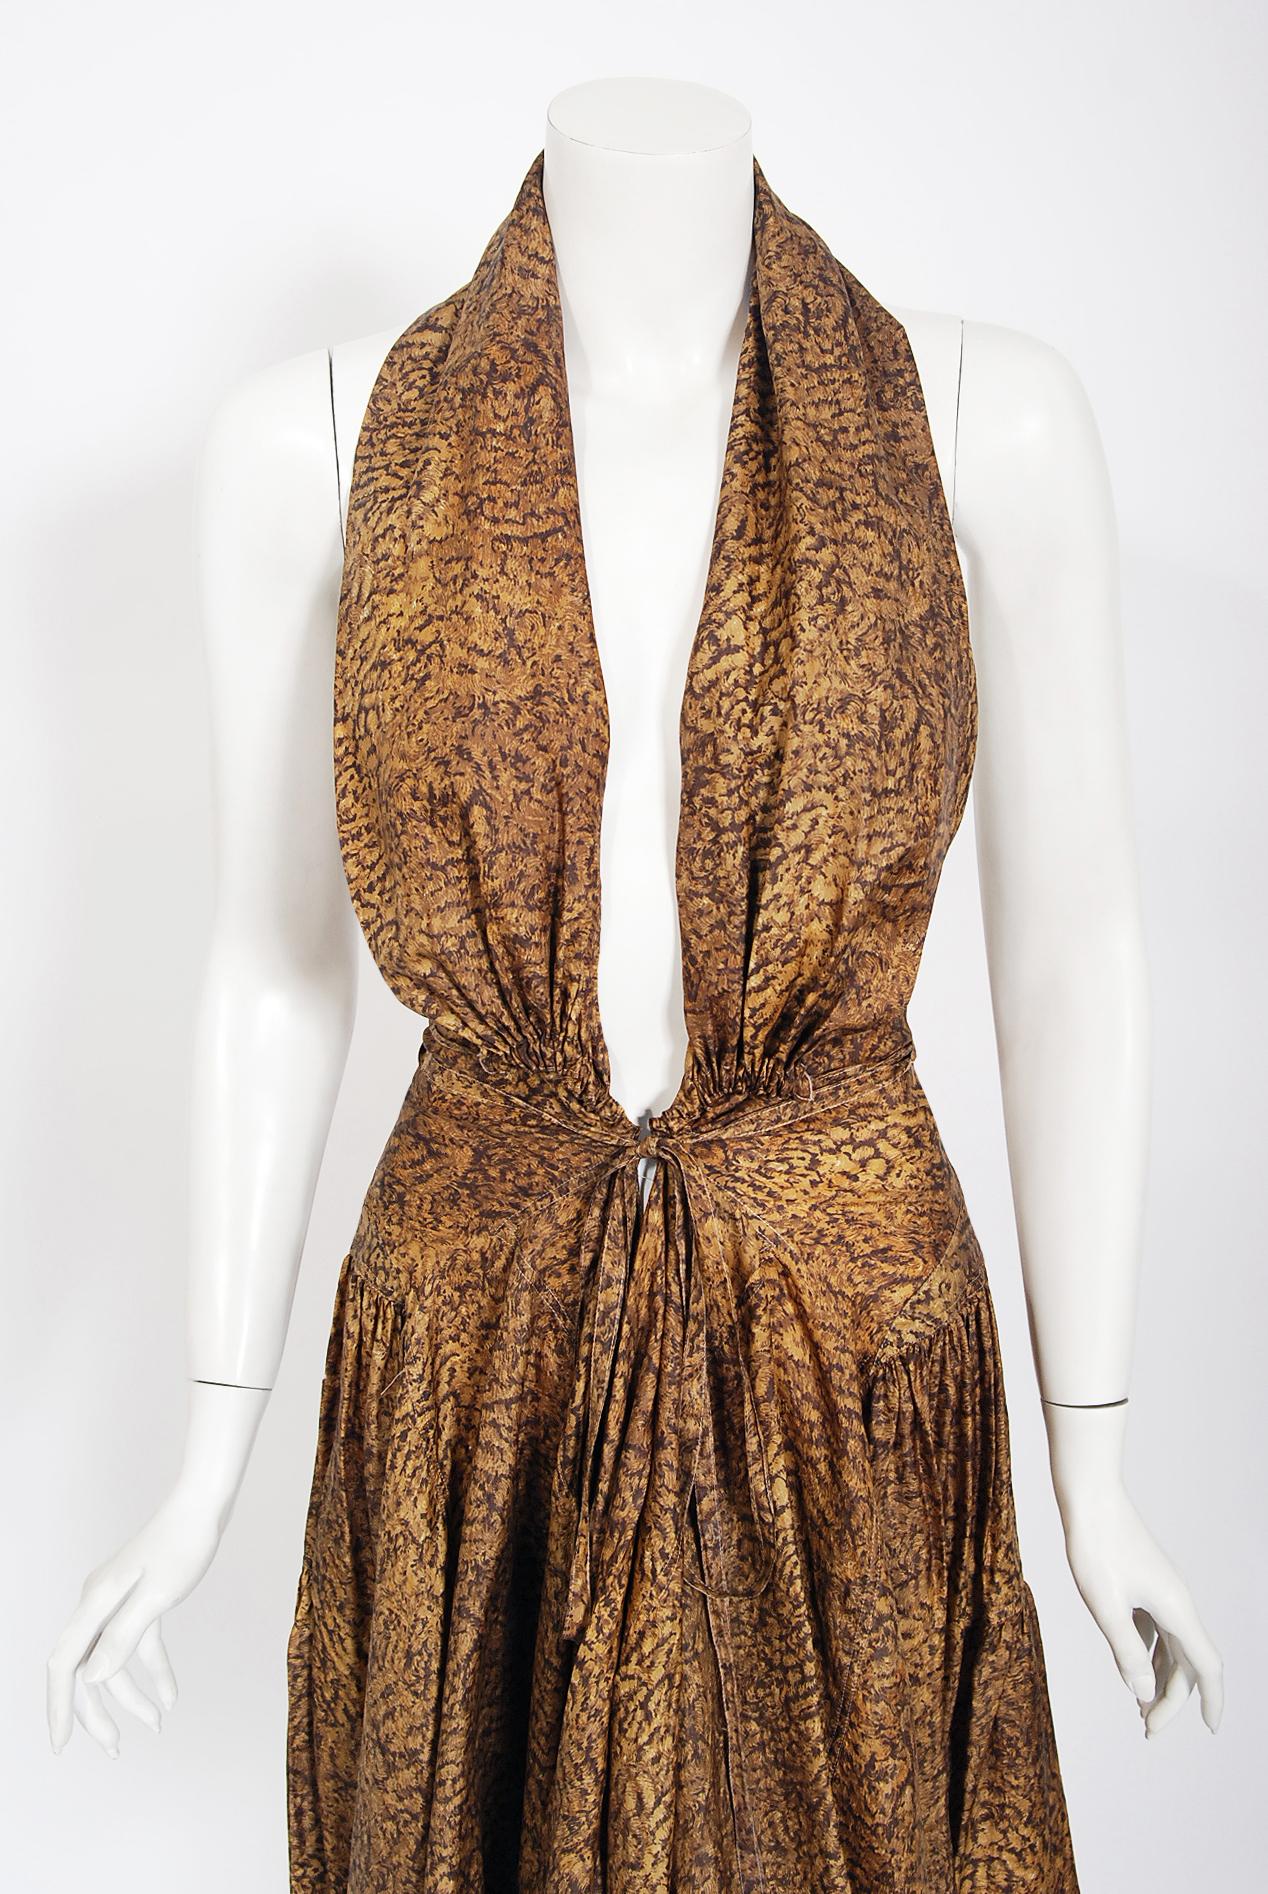 An iconic golden marble print silk dress from Azzedine Alaia's 1987 Spring-Summer collection. The same dress was famously worn by Madonna for the cover of Cosmopolitan Magazine July issue. In the 1980's when most of the fashion world was embracing